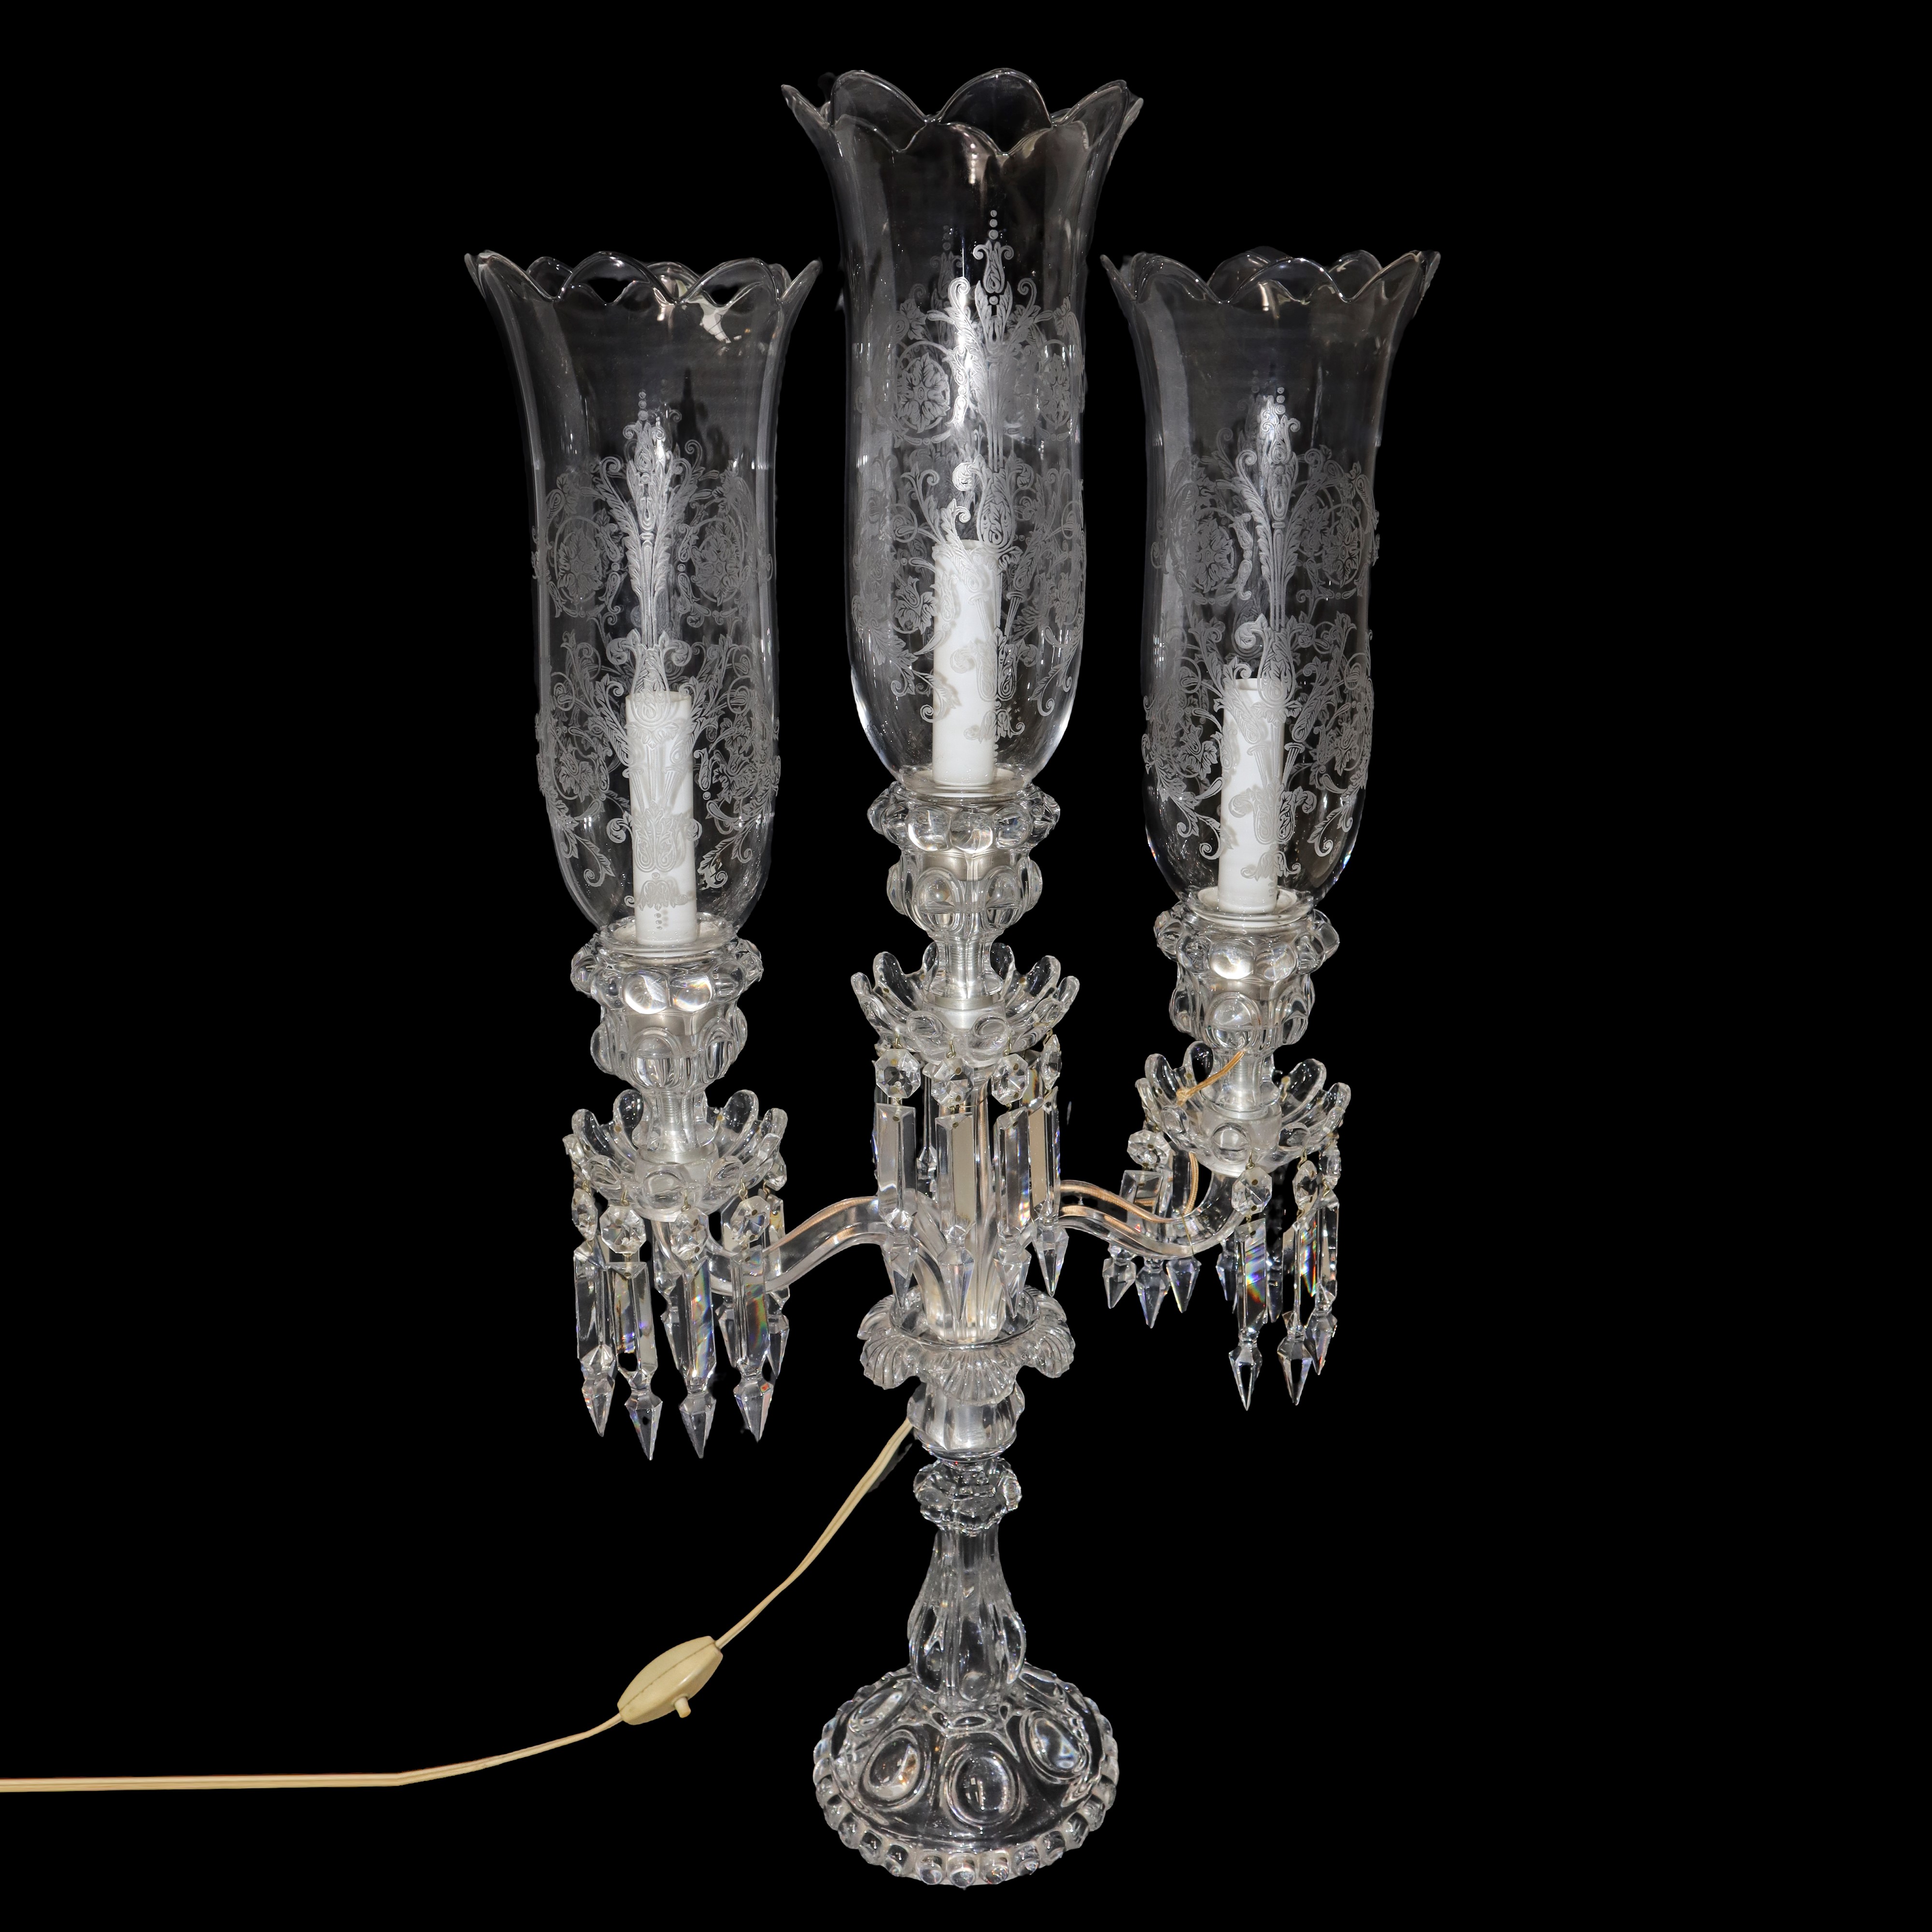 Buy Candelabra For Sale At Auction